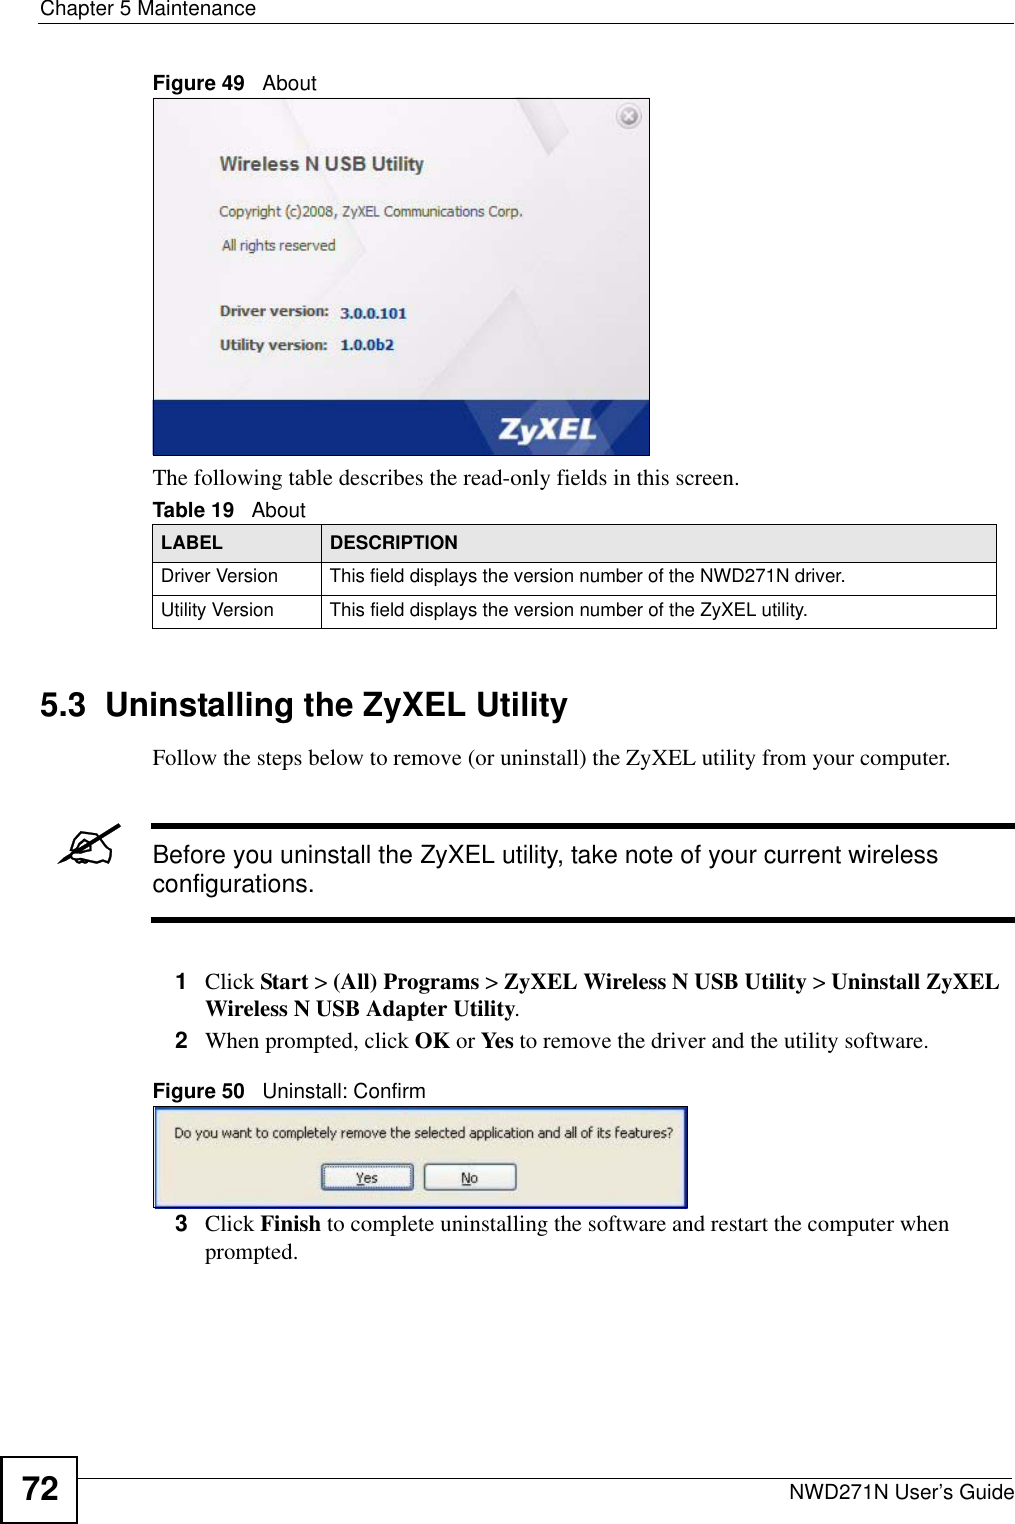 Chapter 5 MaintenanceNWD271N User’s Guide72Figure 49   About The following table describes the read-only fields in this screen. 5.3  Uninstalling the ZyXEL Utility Follow the steps below to remove (or uninstall) the ZyXEL utility from your computer.&quot;Before you uninstall the ZyXEL utility, take note of your current wireless configurations.1Click Start &gt; (All) Programs &gt; ZyXEL Wireless N USB Utility &gt; Uninstall ZyXEL Wireless N USB Adapter Utility.2When prompted, click OK or Yes to remove the driver and the utility software.Figure 50   Uninstall: Confirm  3Click Finish to complete uninstalling the software and restart the computer when prompted.Table 19   About LABEL DESCRIPTIONDriver Version This field displays the version number of the NWD271N driver.Utility Version This field displays the version number of the ZyXEL utility.